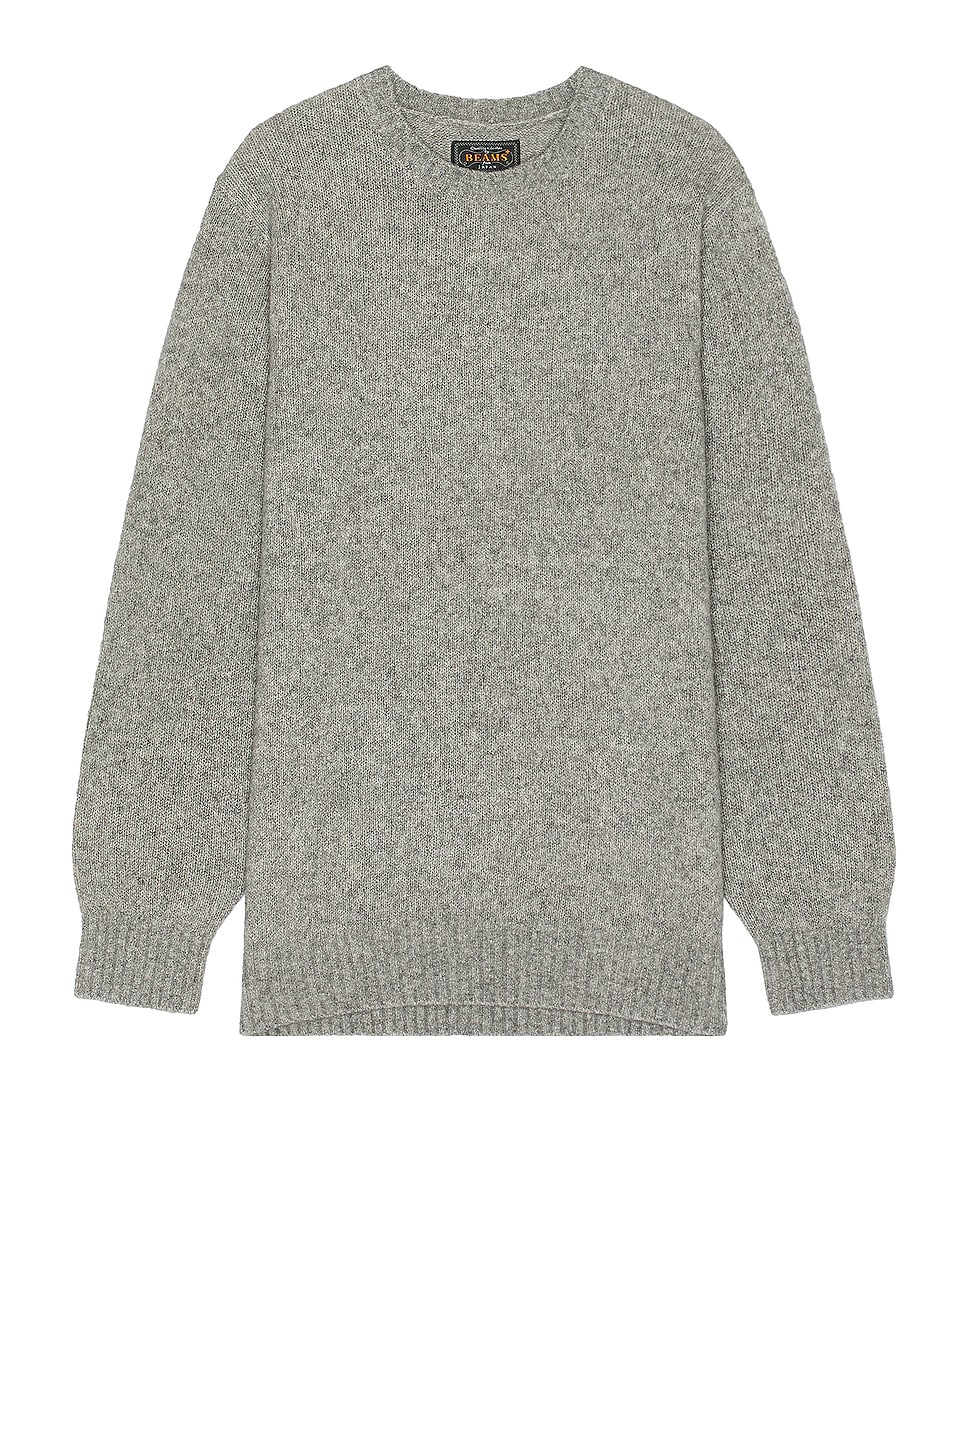 Image 1 of Beams Plus Crew Cashmere Sweater in Grey